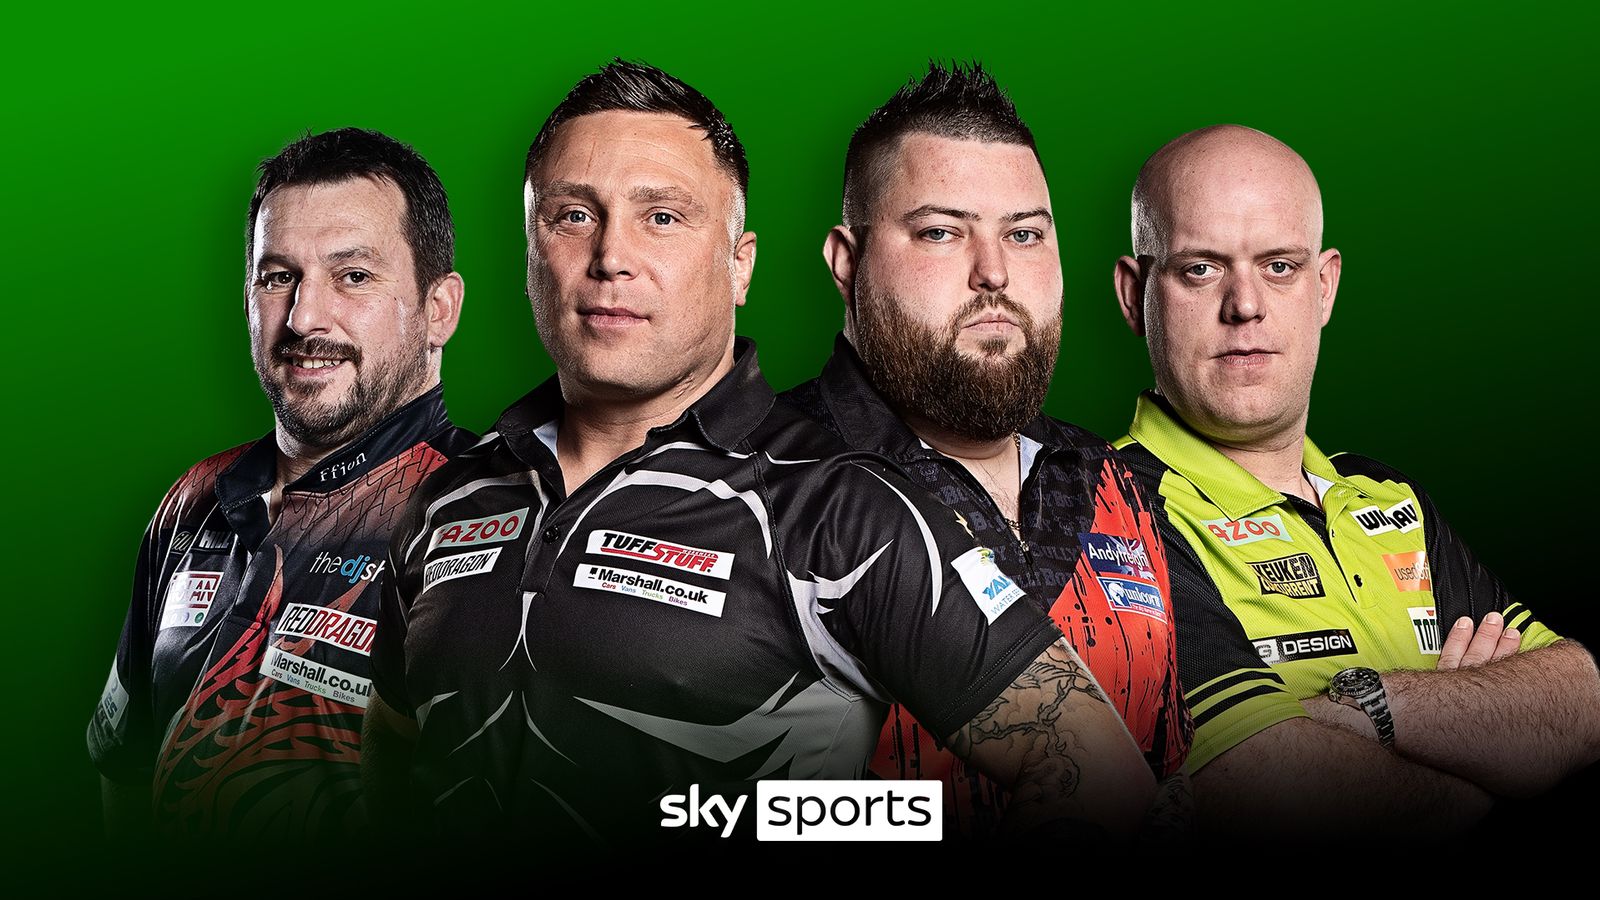 Premier League Darts: Play-Off Predictions with Gerwyn Price, Michael Smith, Michael van Gerwen and Jonny Clayton in action